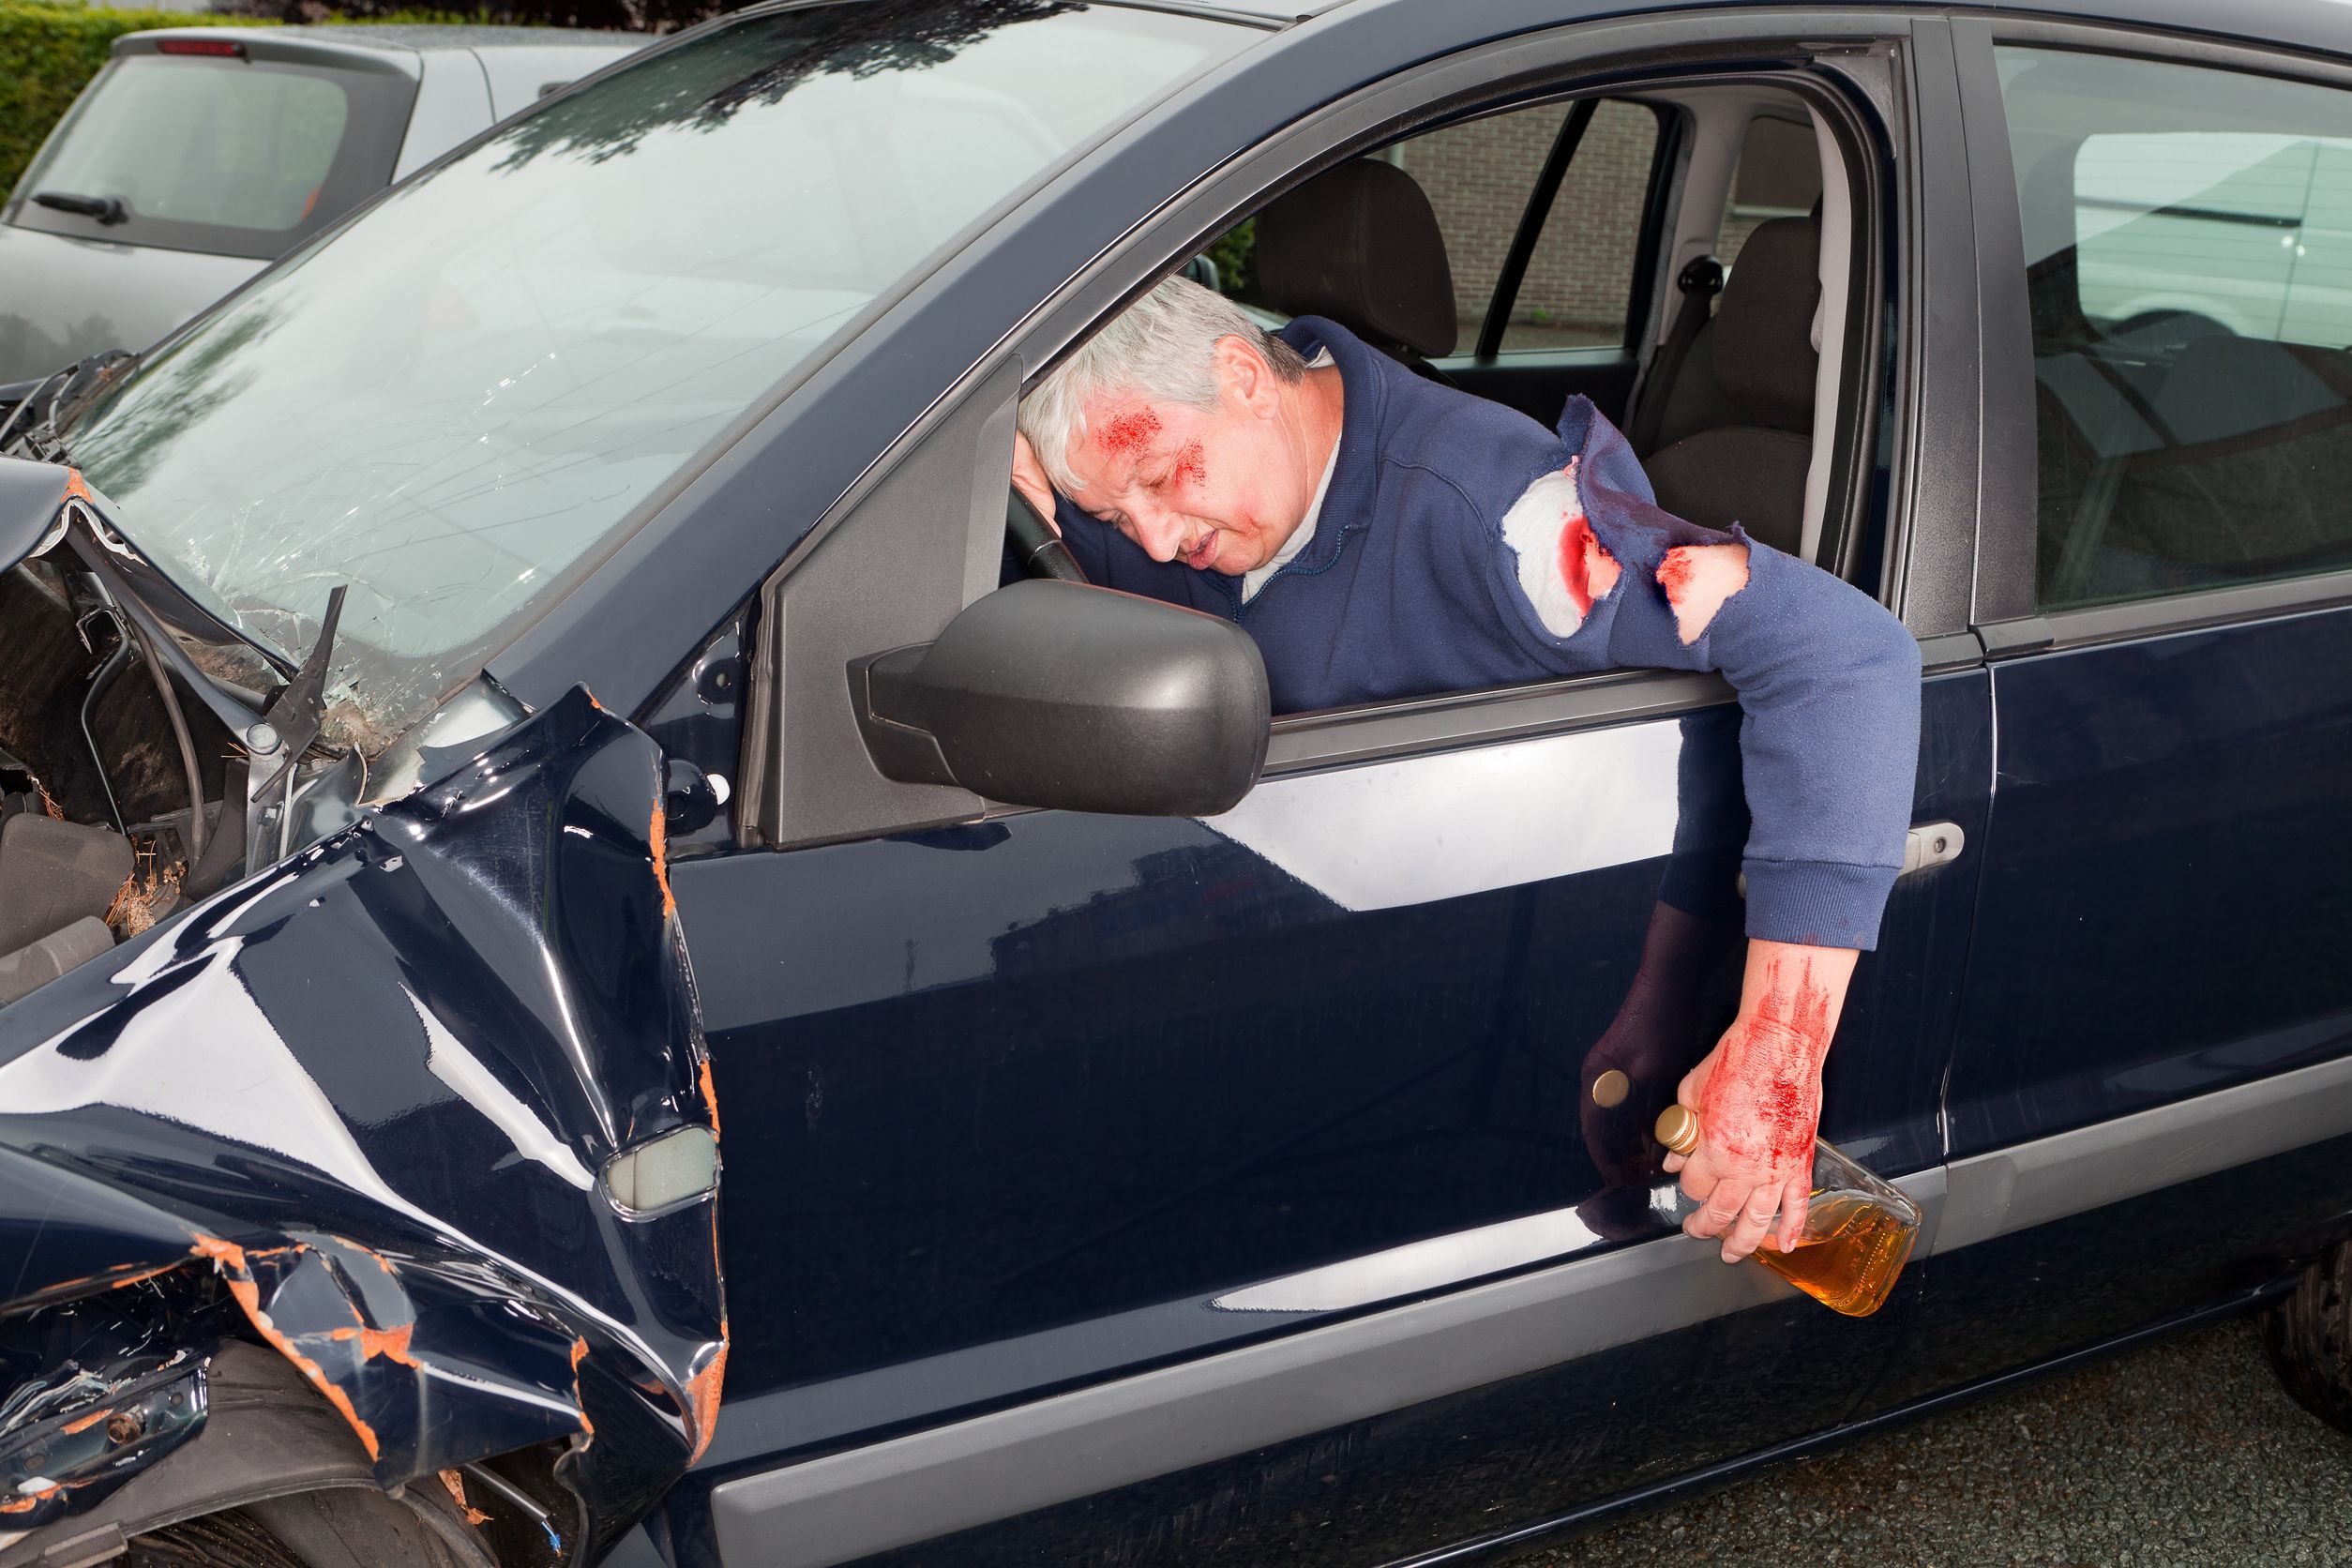 Dwi Dui Penalties For Adults In Dallas | Scarier Than Anything